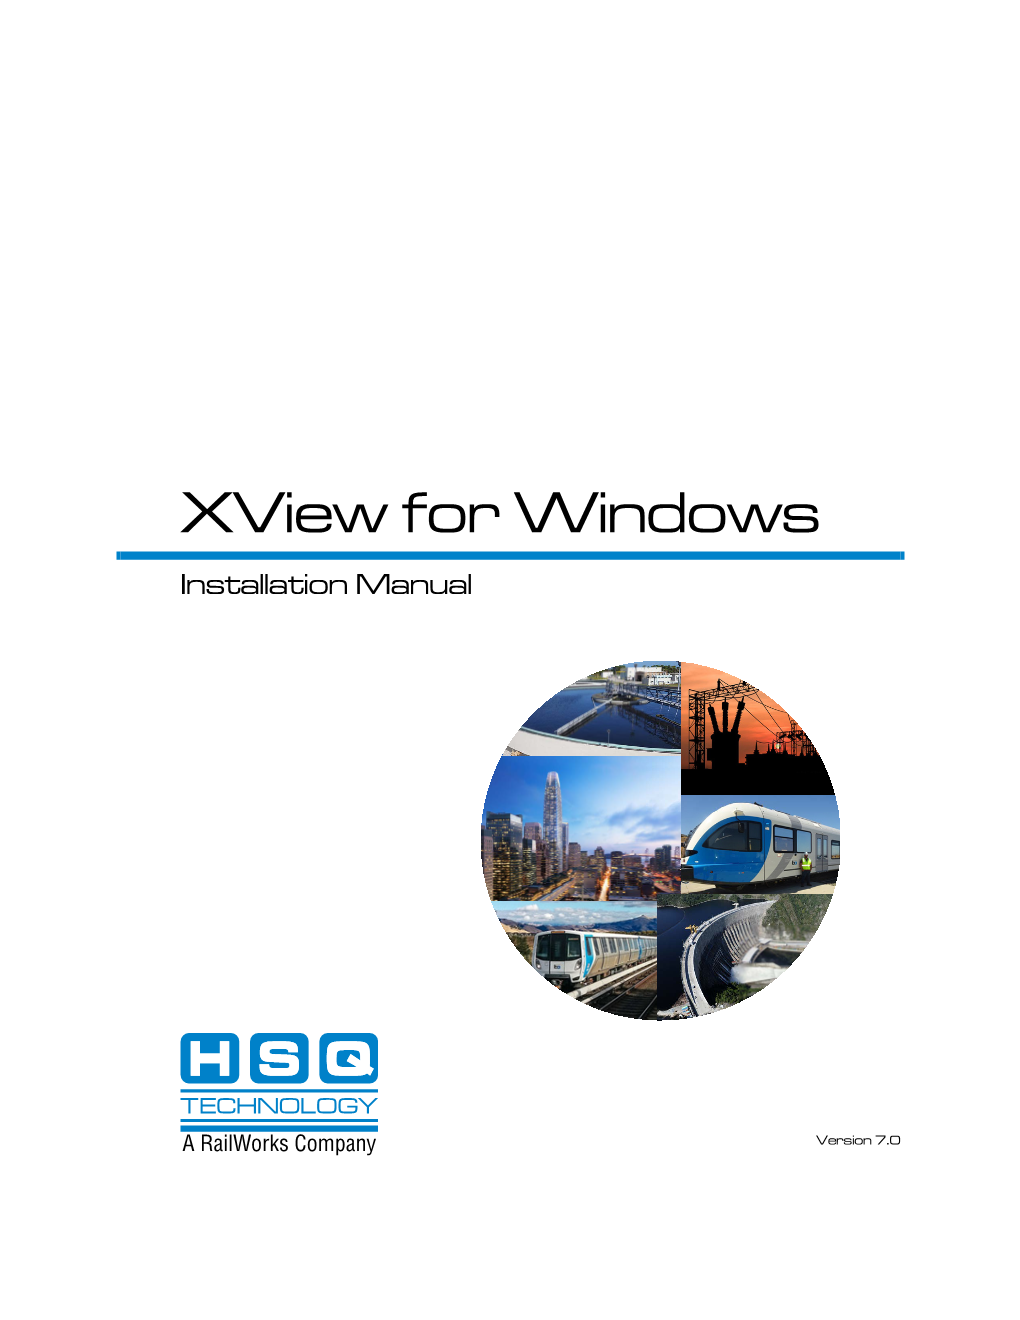 Xview for Windows Installation Manual